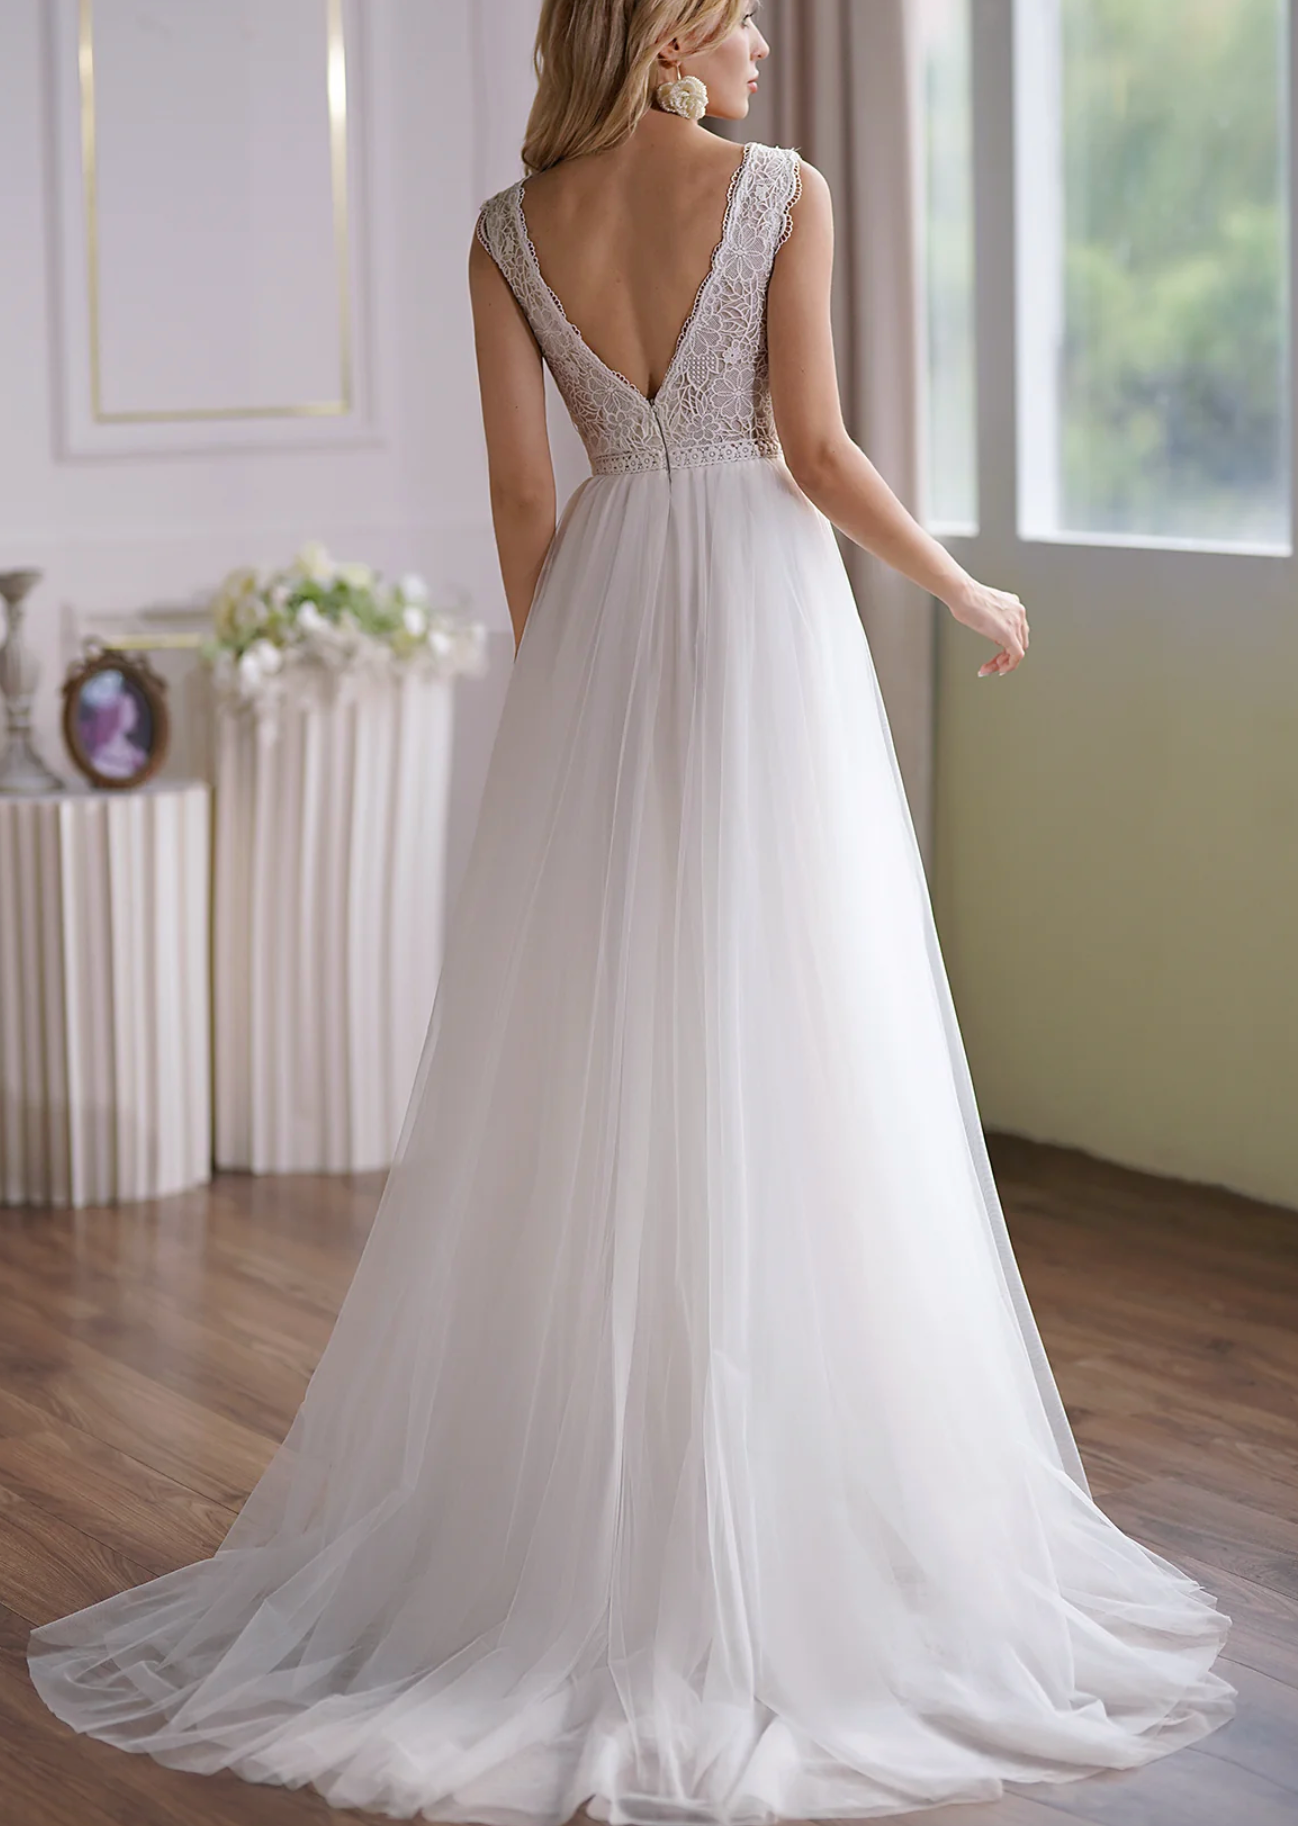 Load image into Gallery viewer, Illusion Lace Boho Wedding Dress With Alluring Open Back
